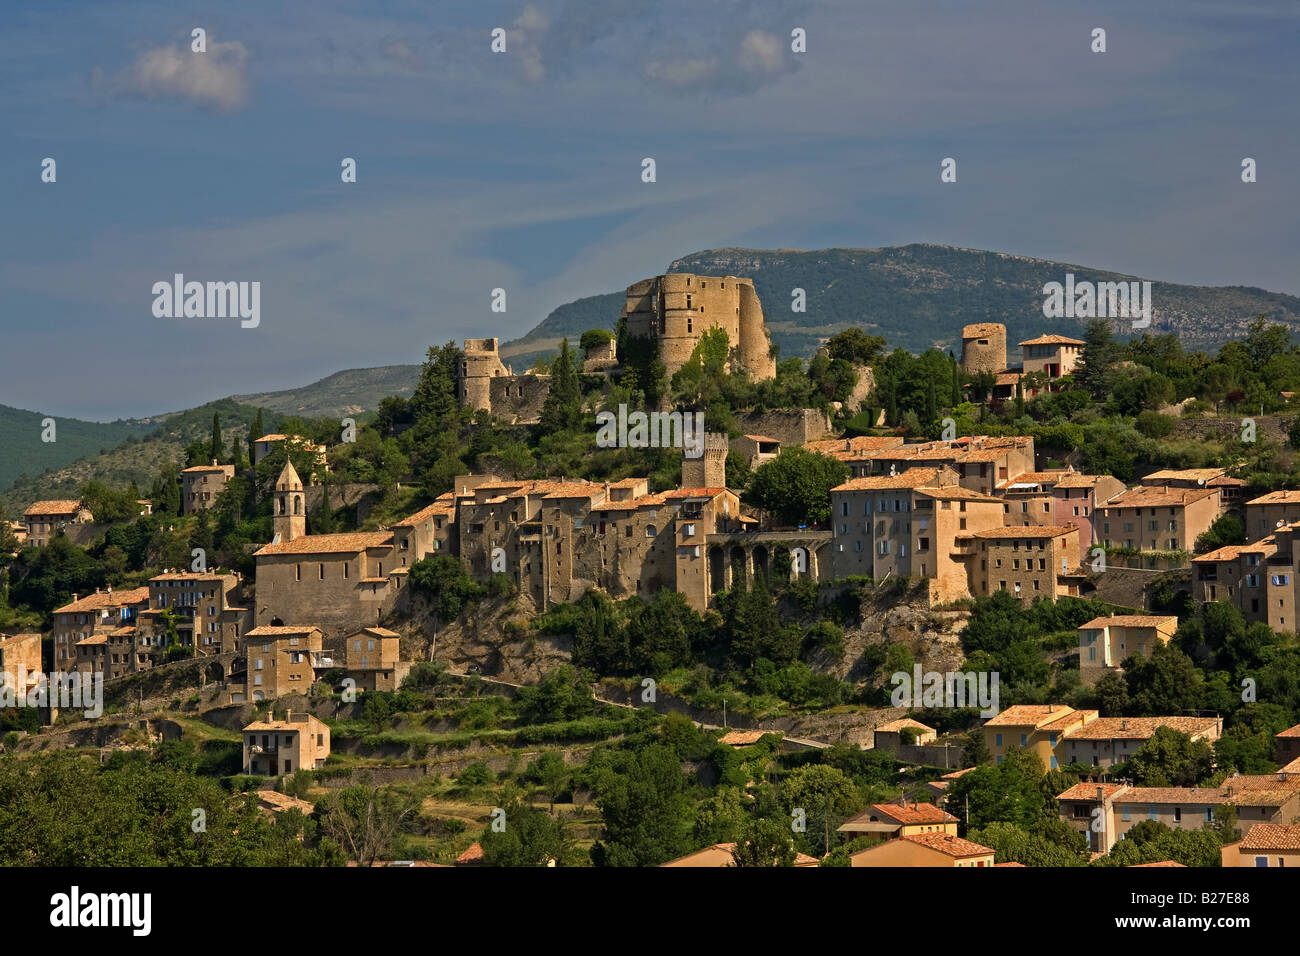 Village of Montbrun-Les Bains sitting high up in the hills of Provence, France Stock Photo